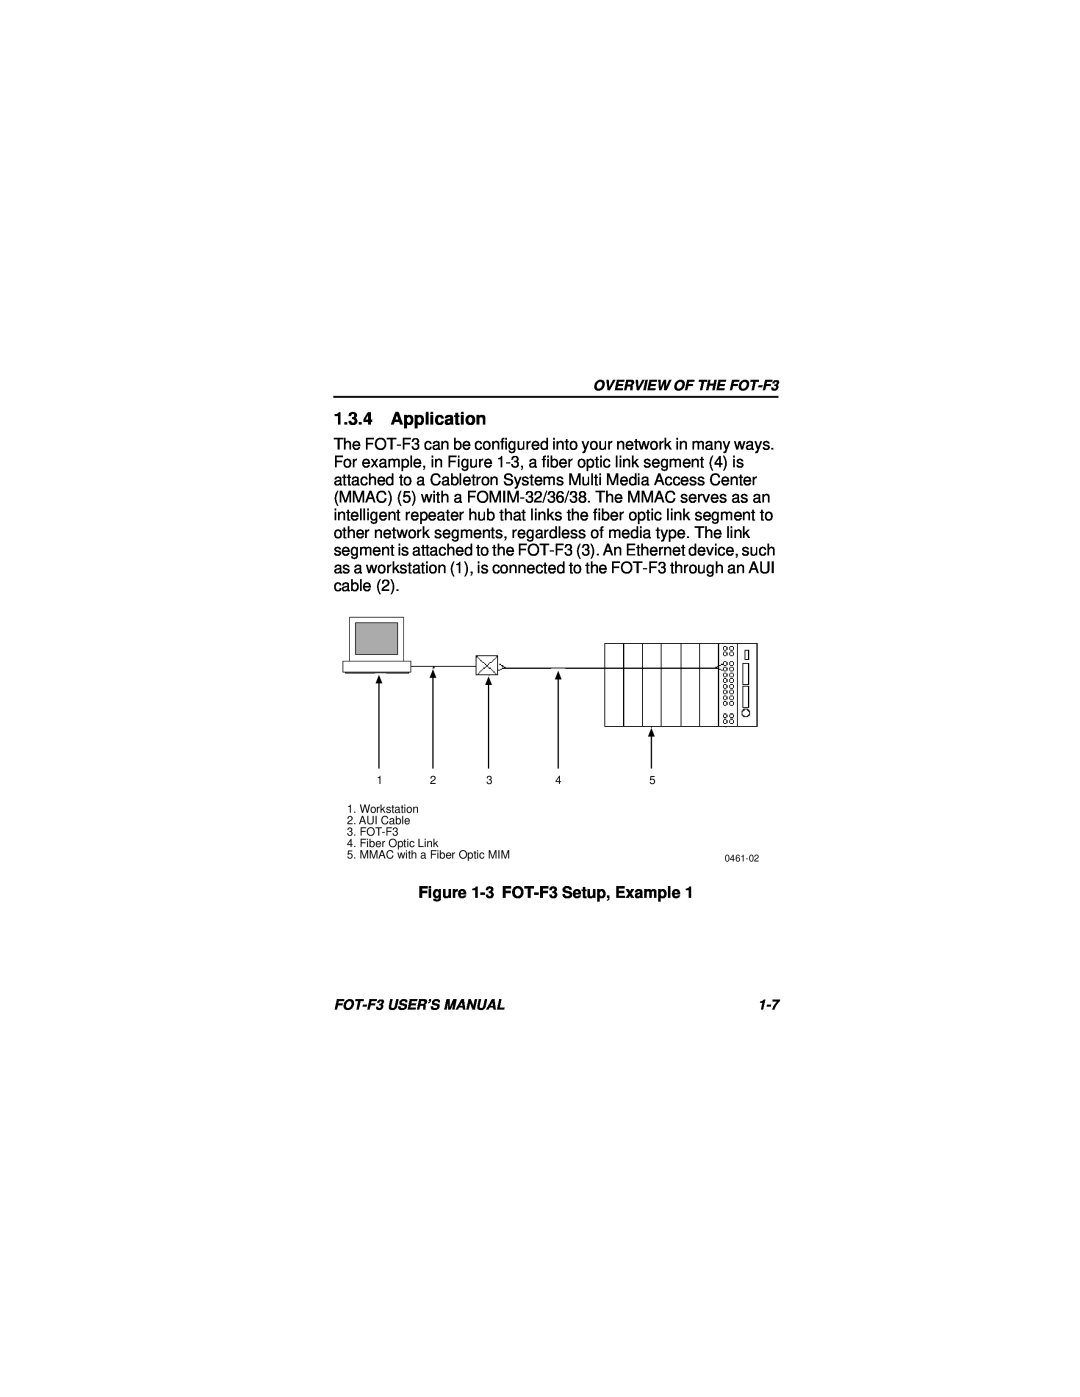 Cabletron Systems user manual Application, 3 FOT-F3 Setup, Example 